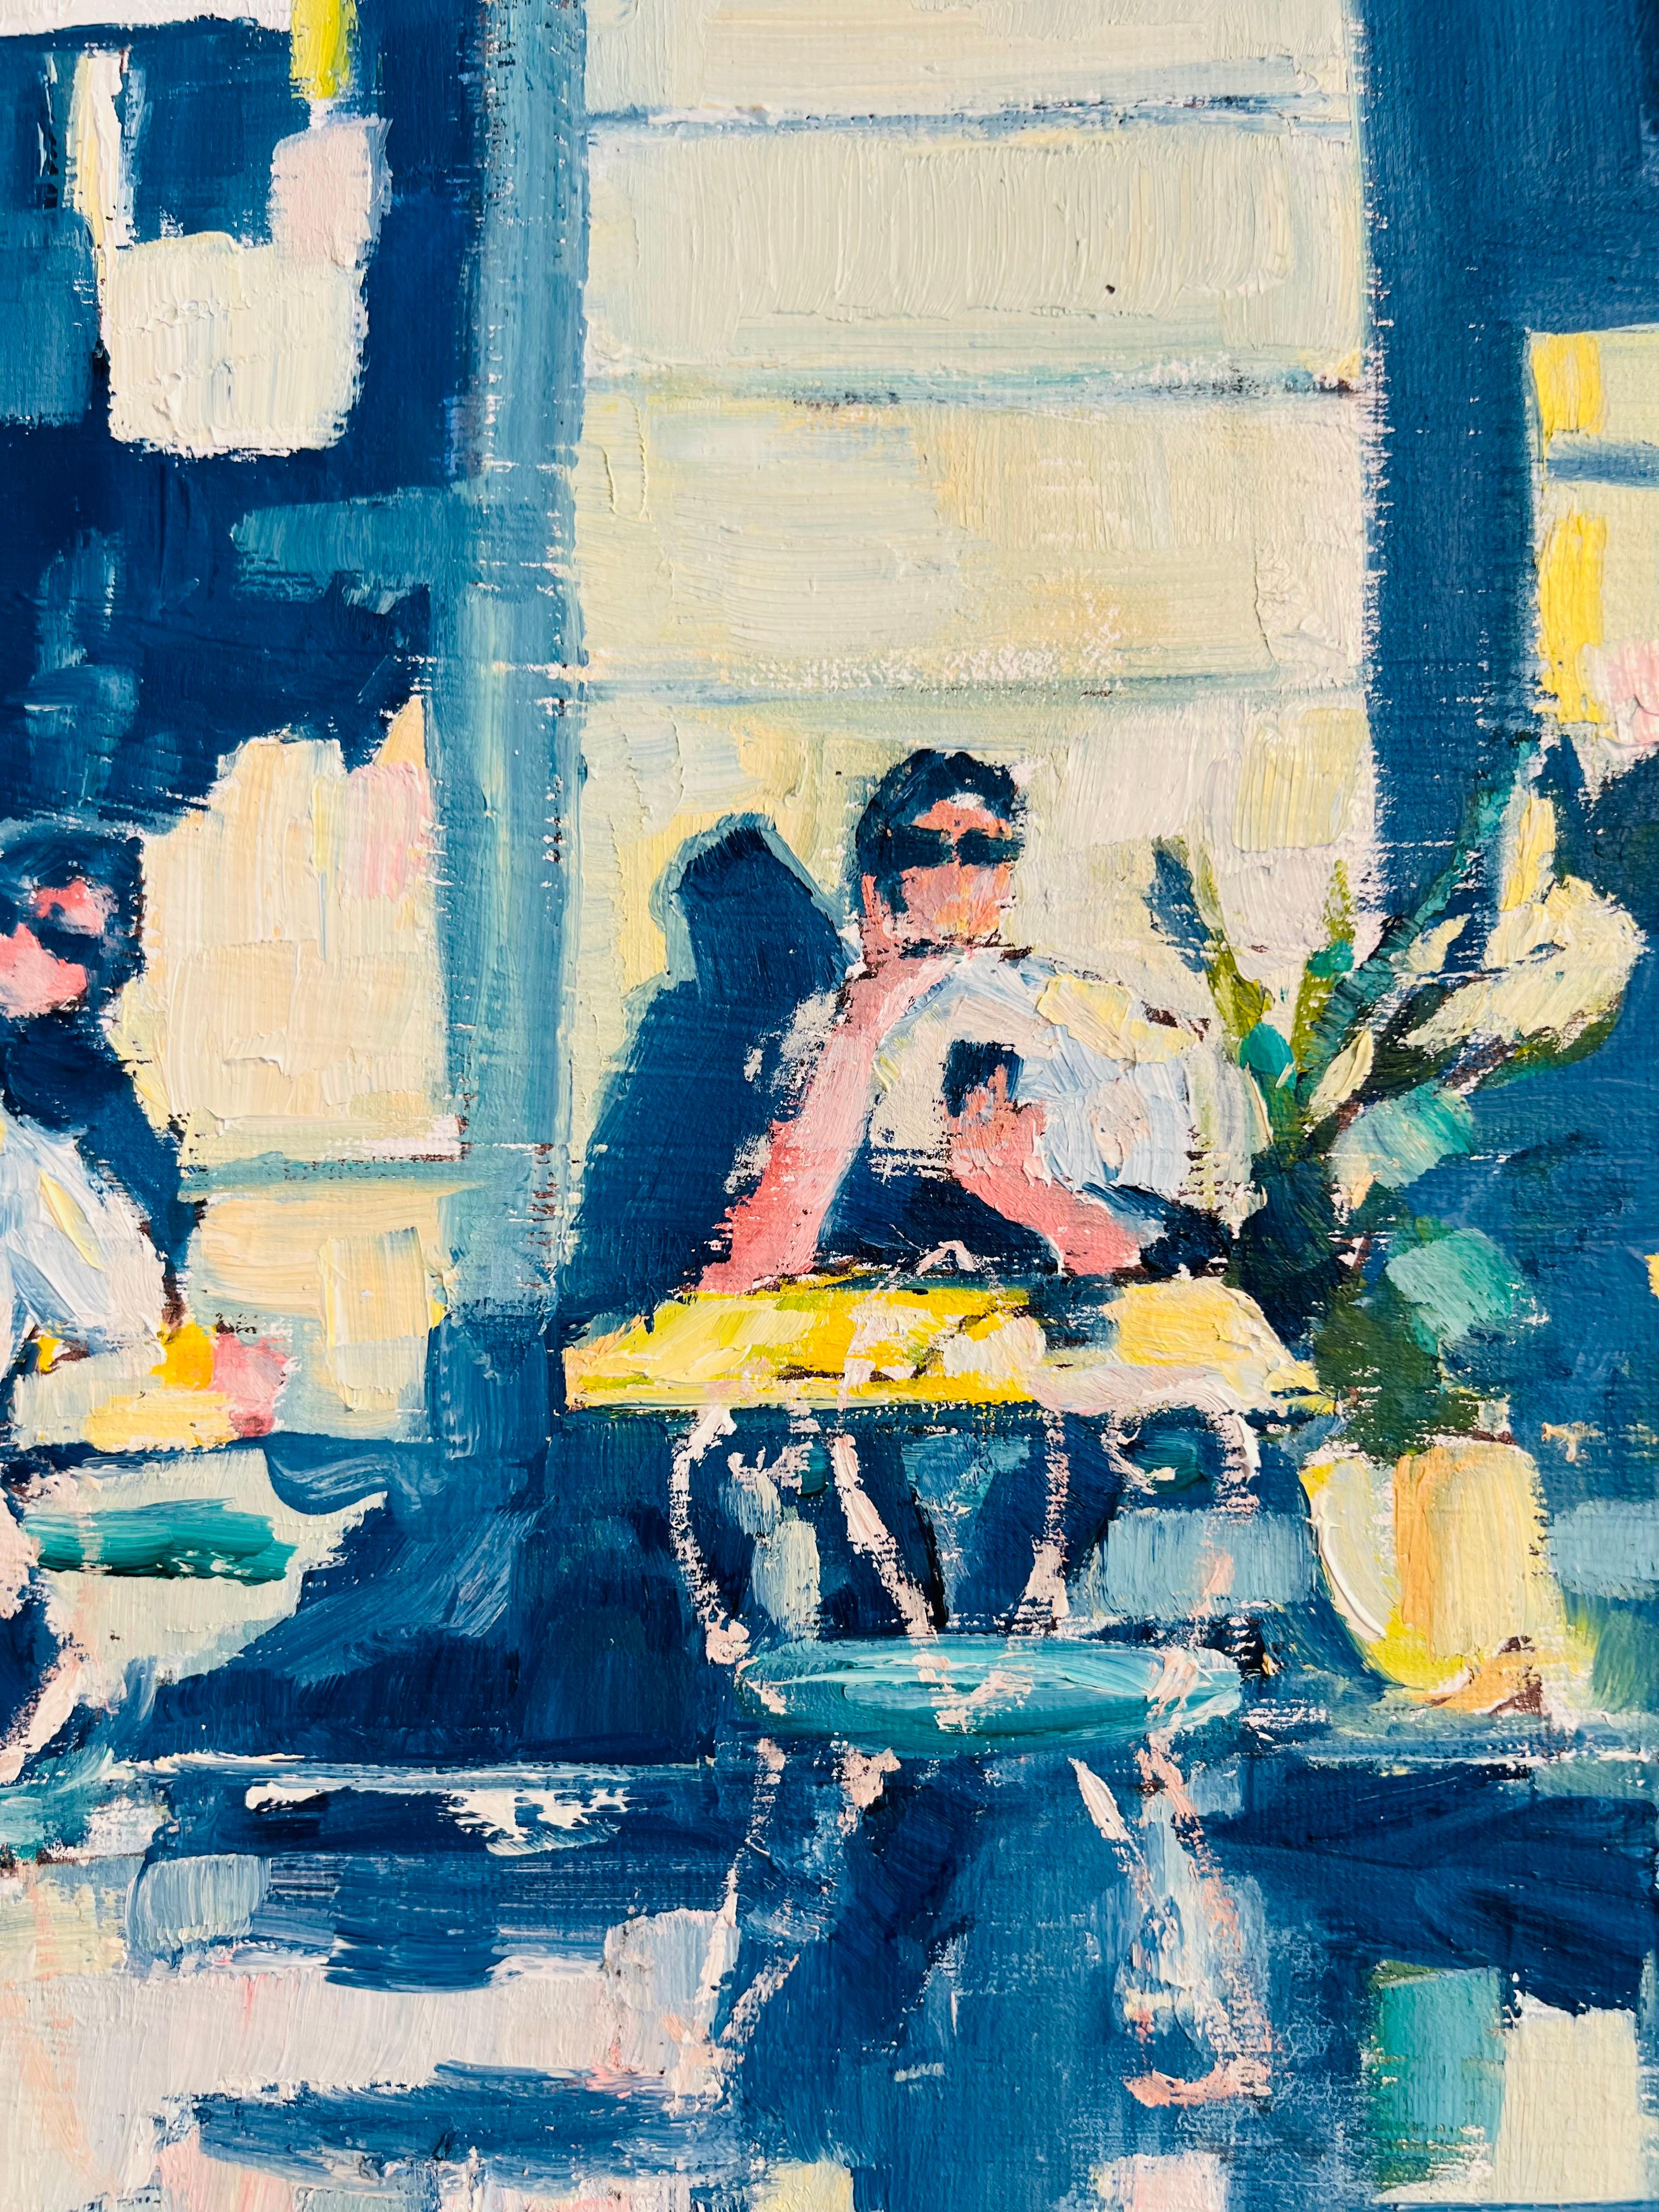 Chelsea Cafe-Original impressionism figurative cityscape oil painting-Art - Impressionist Painting by Richard Gower